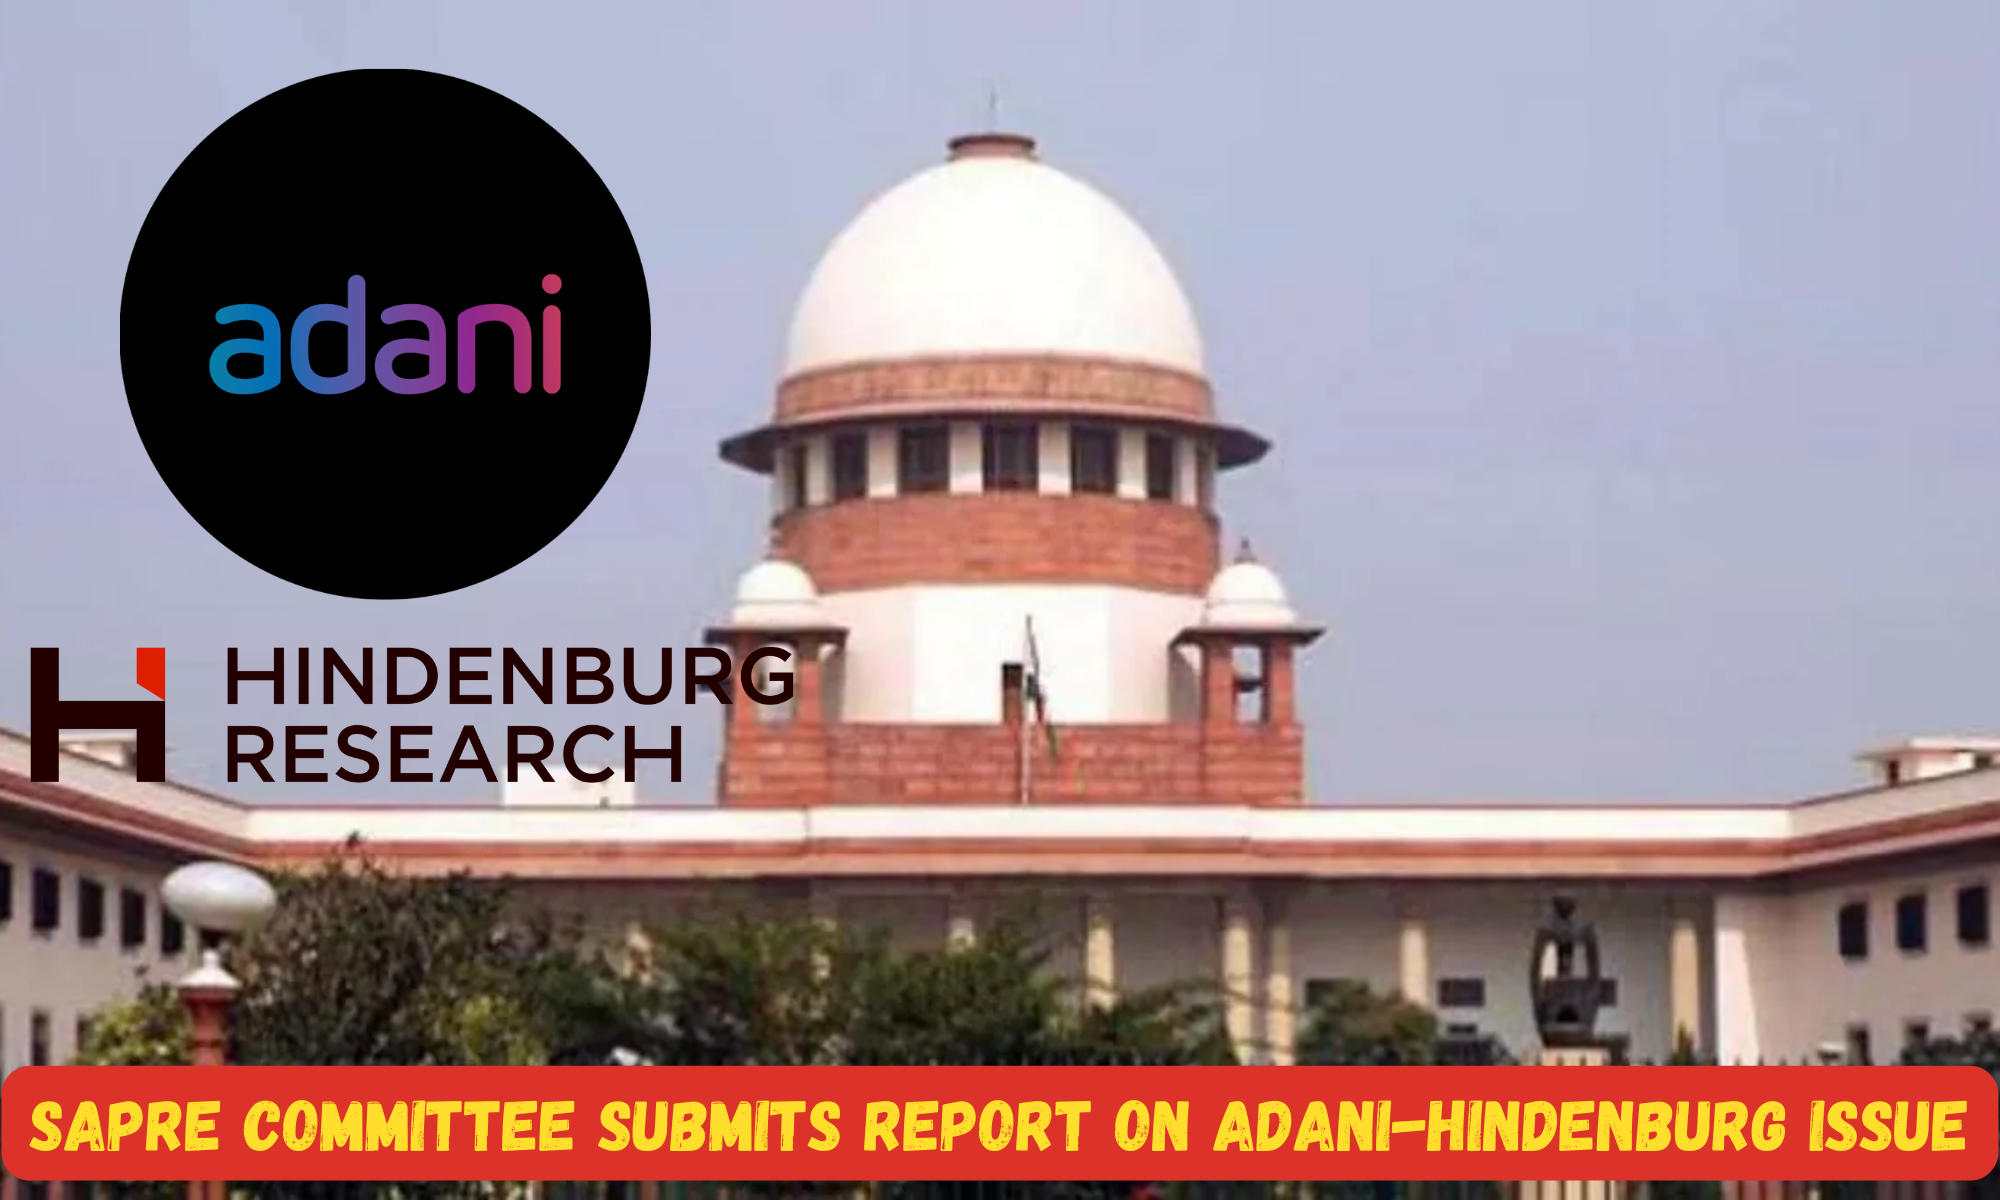 Supreme Court appointed Sapre Committee submits report on Adani-Hindenburg issue